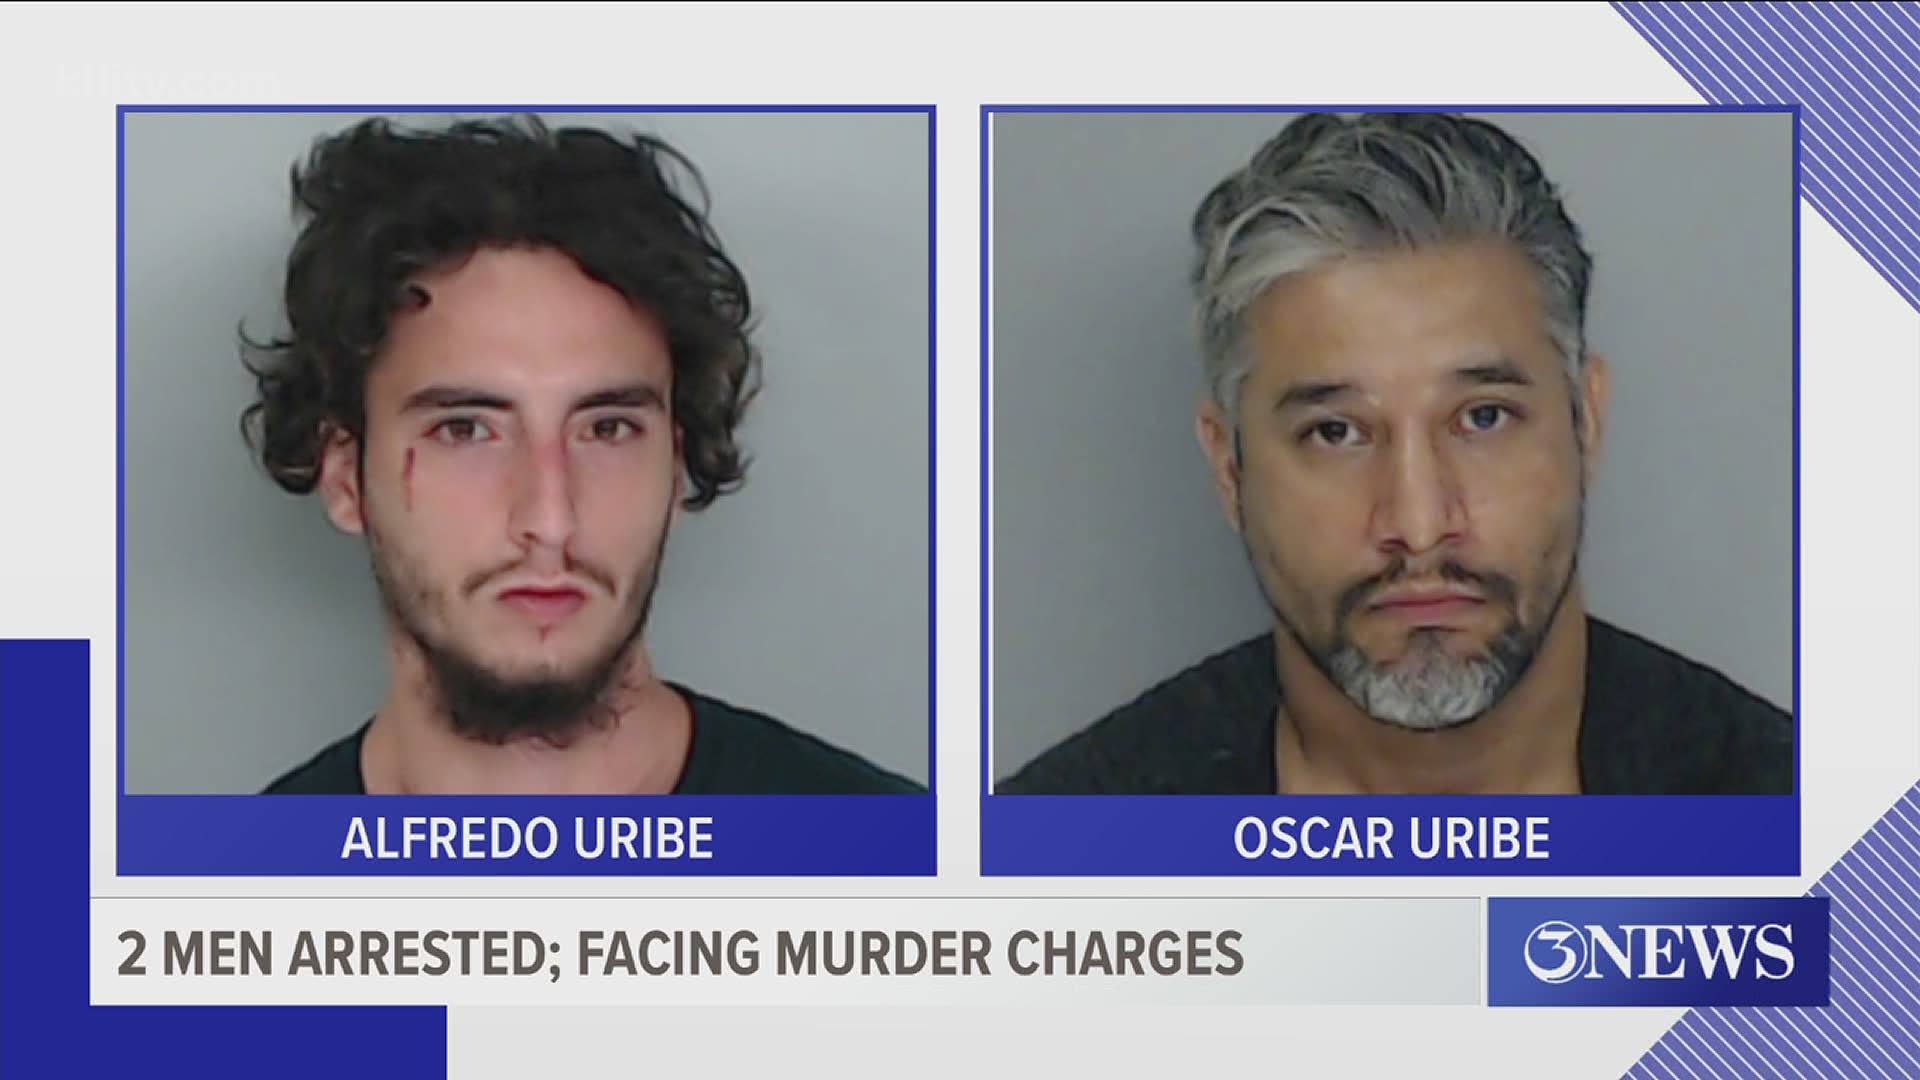 45-year-old Oscar Uribe and 20-year-old Alfredo Uribe Jr. were arrested and are facing several charges, including one for Murder.